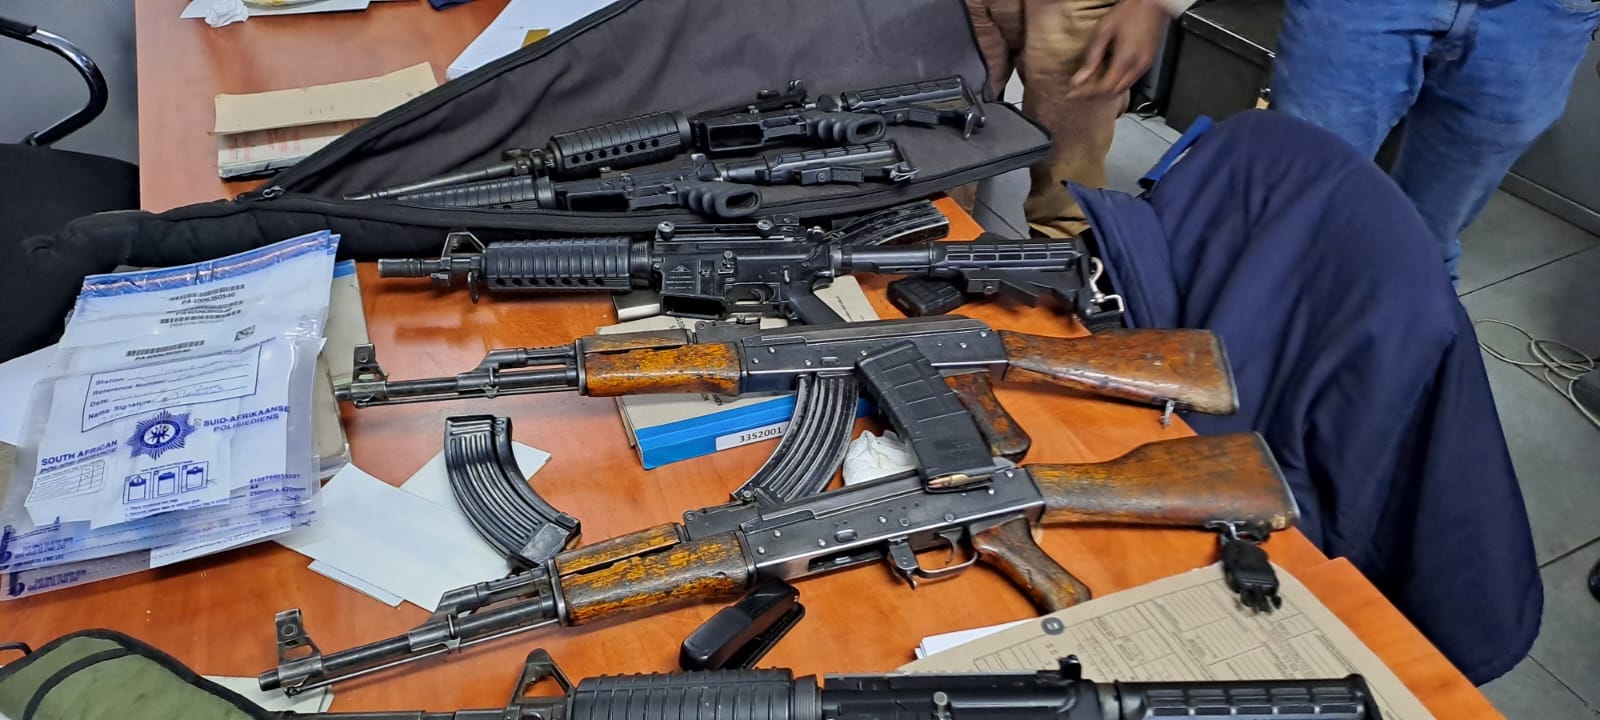 Two security guards arrested with six rifles and 136 live ammunition